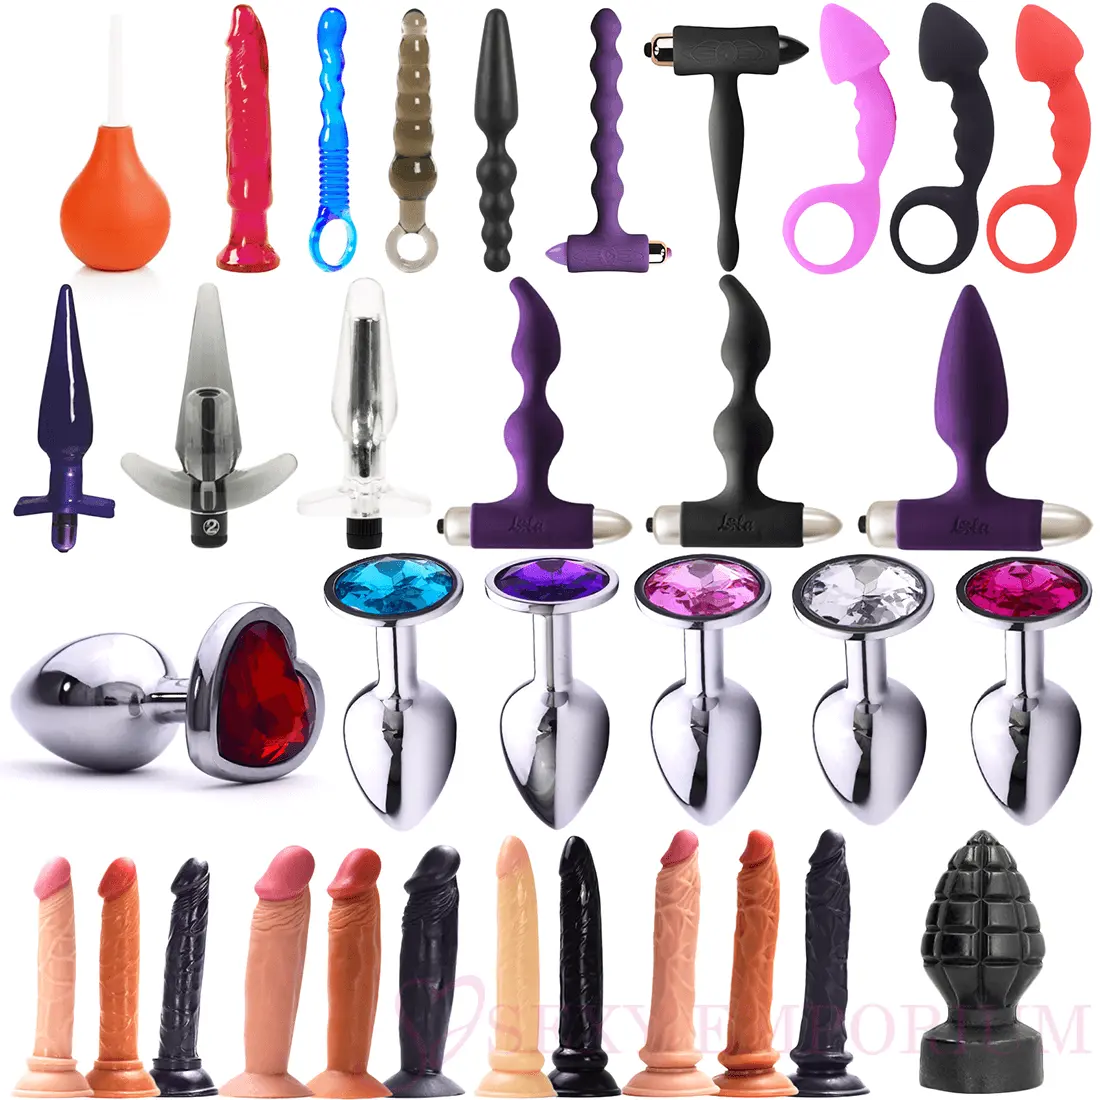 danny cloutier share women using anal toys photos